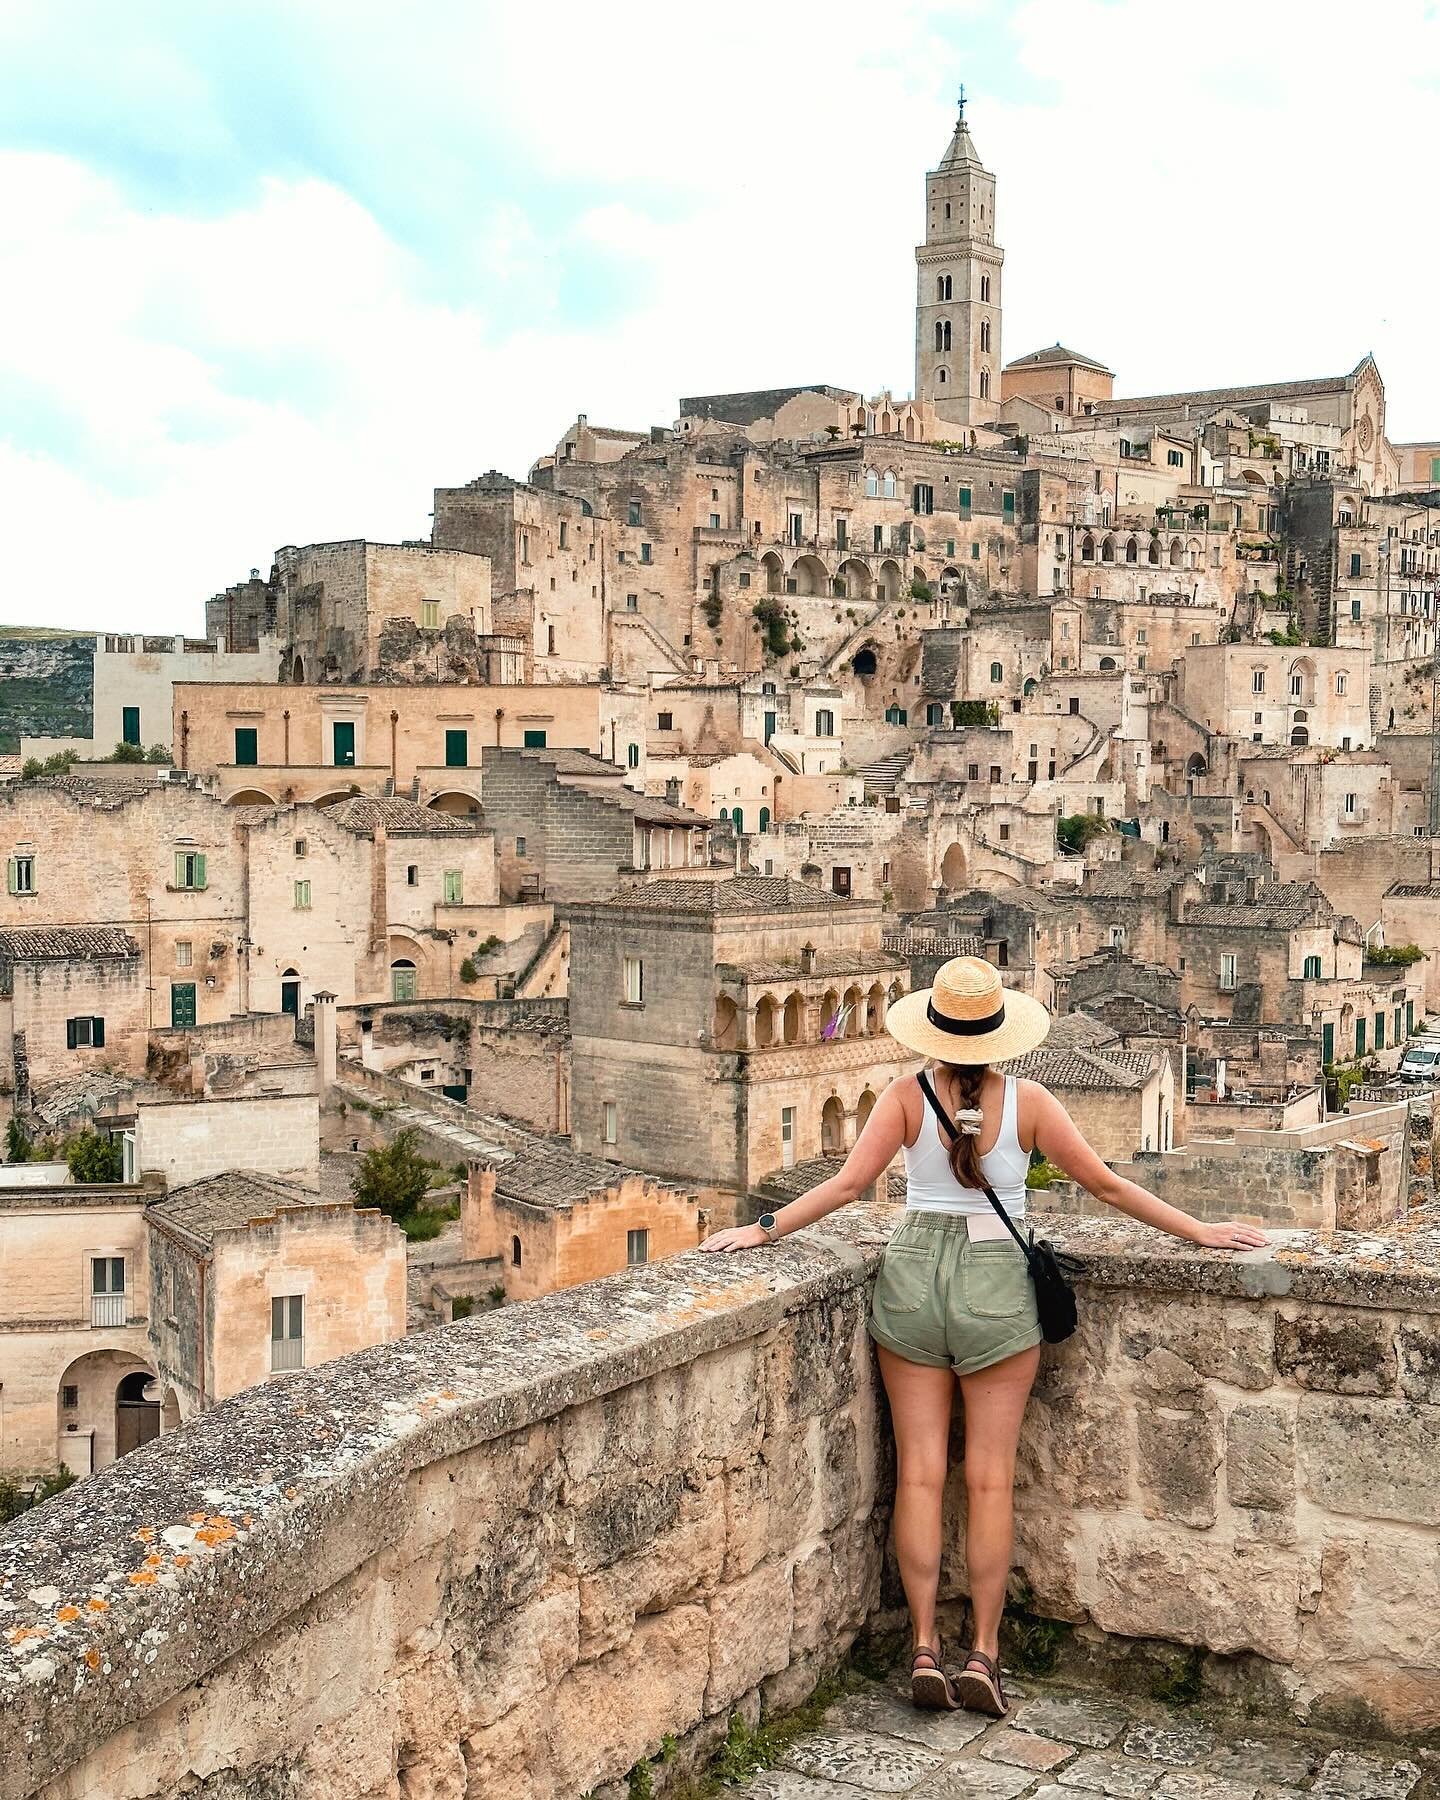 Southern Italy Roadtrip stop one:
📍Matera, Basilicata

Put on the map when it featured in James Bond&rsquo;s No Time To Die, Matera is one of the most fascinating villages in Italy.
The oldest city in the country, and one of the longest continuously